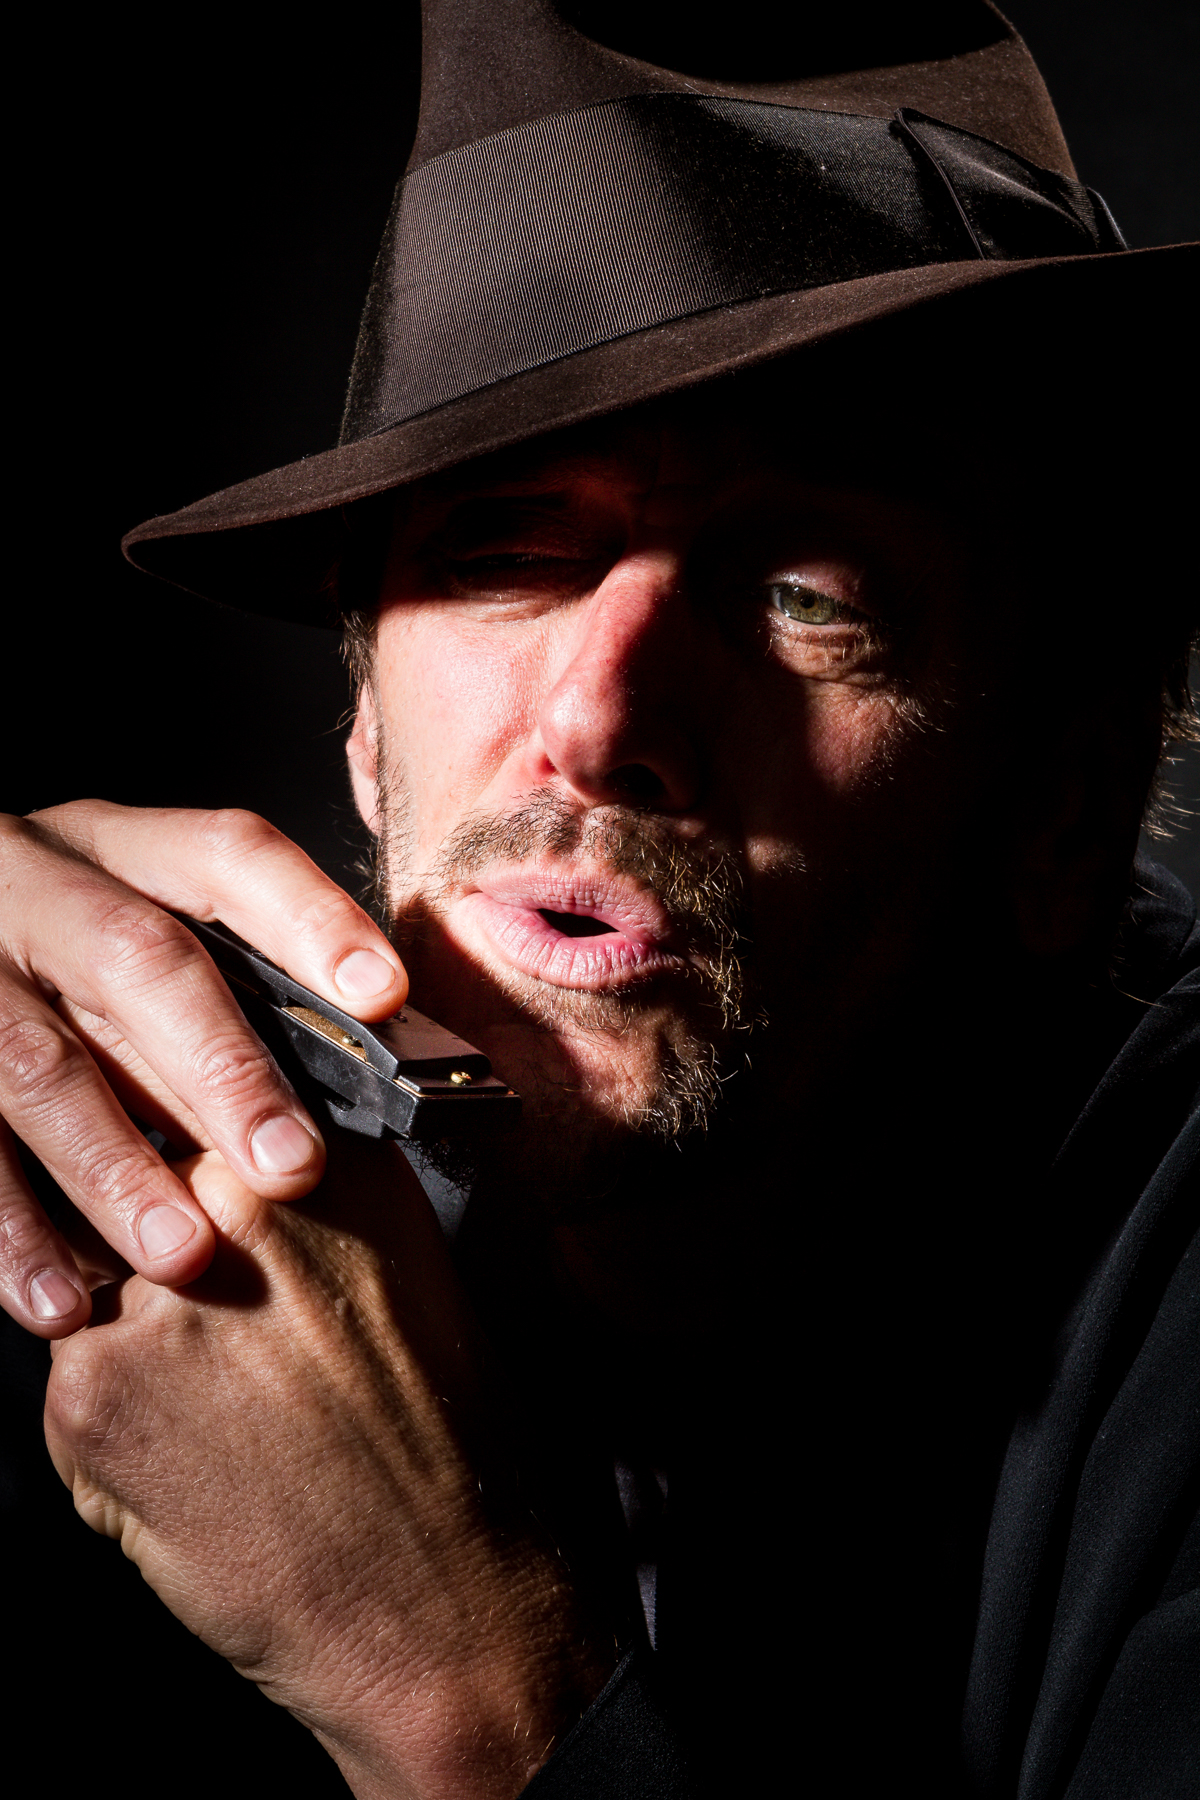 Sommers playing his harmonica as The Bluesman in his first true story one-man play 